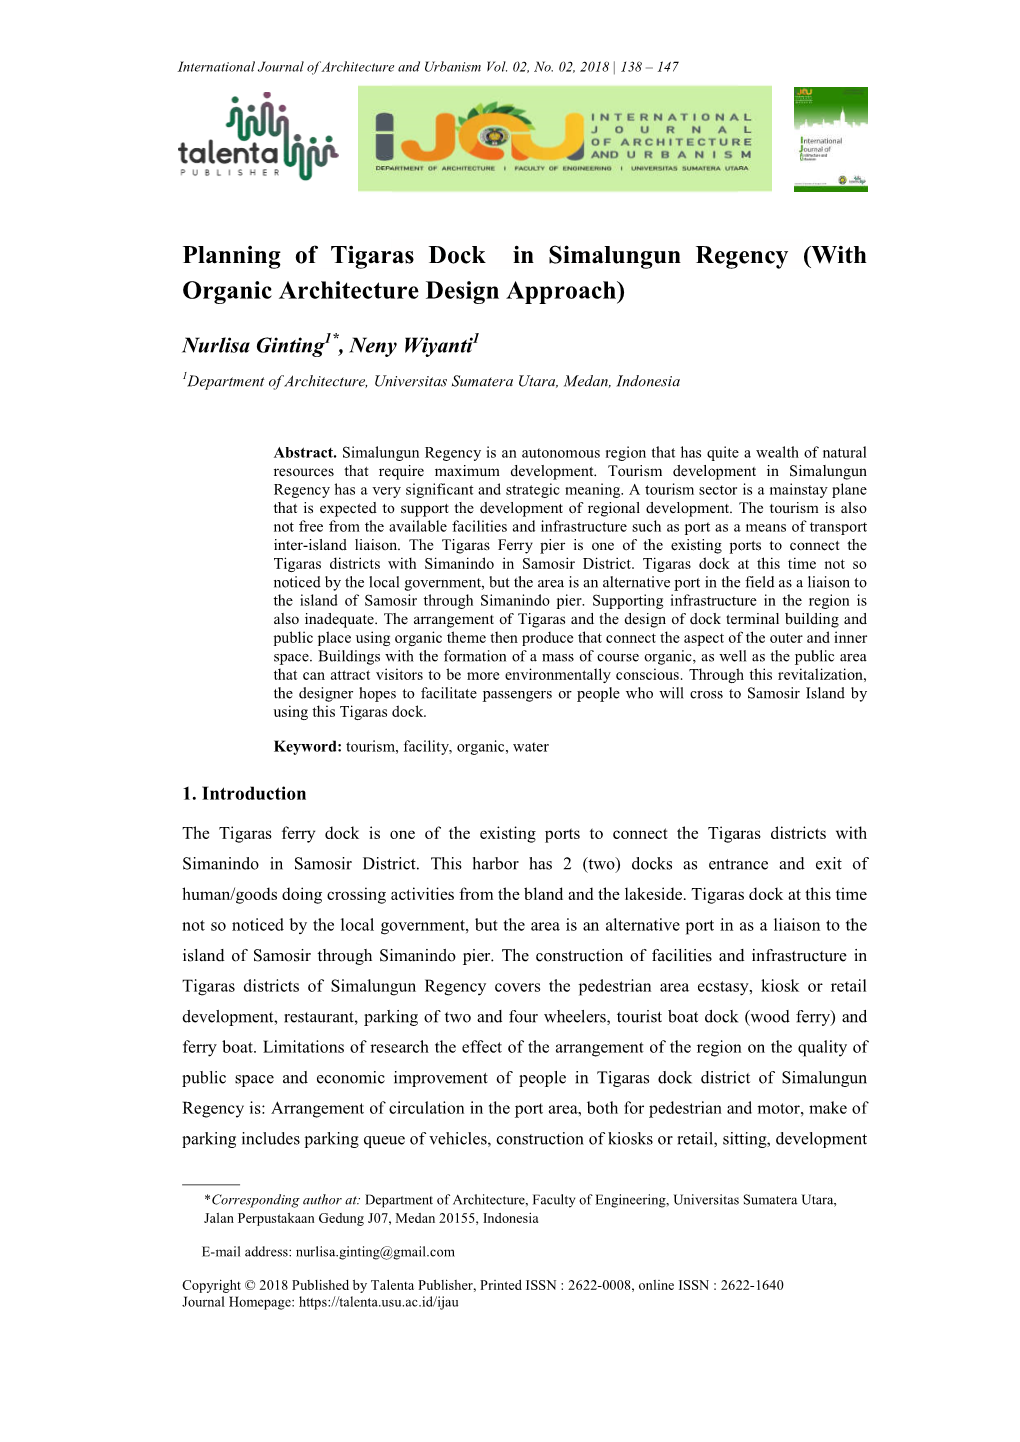 Planning of Tigaras Dock in Organic Architecture